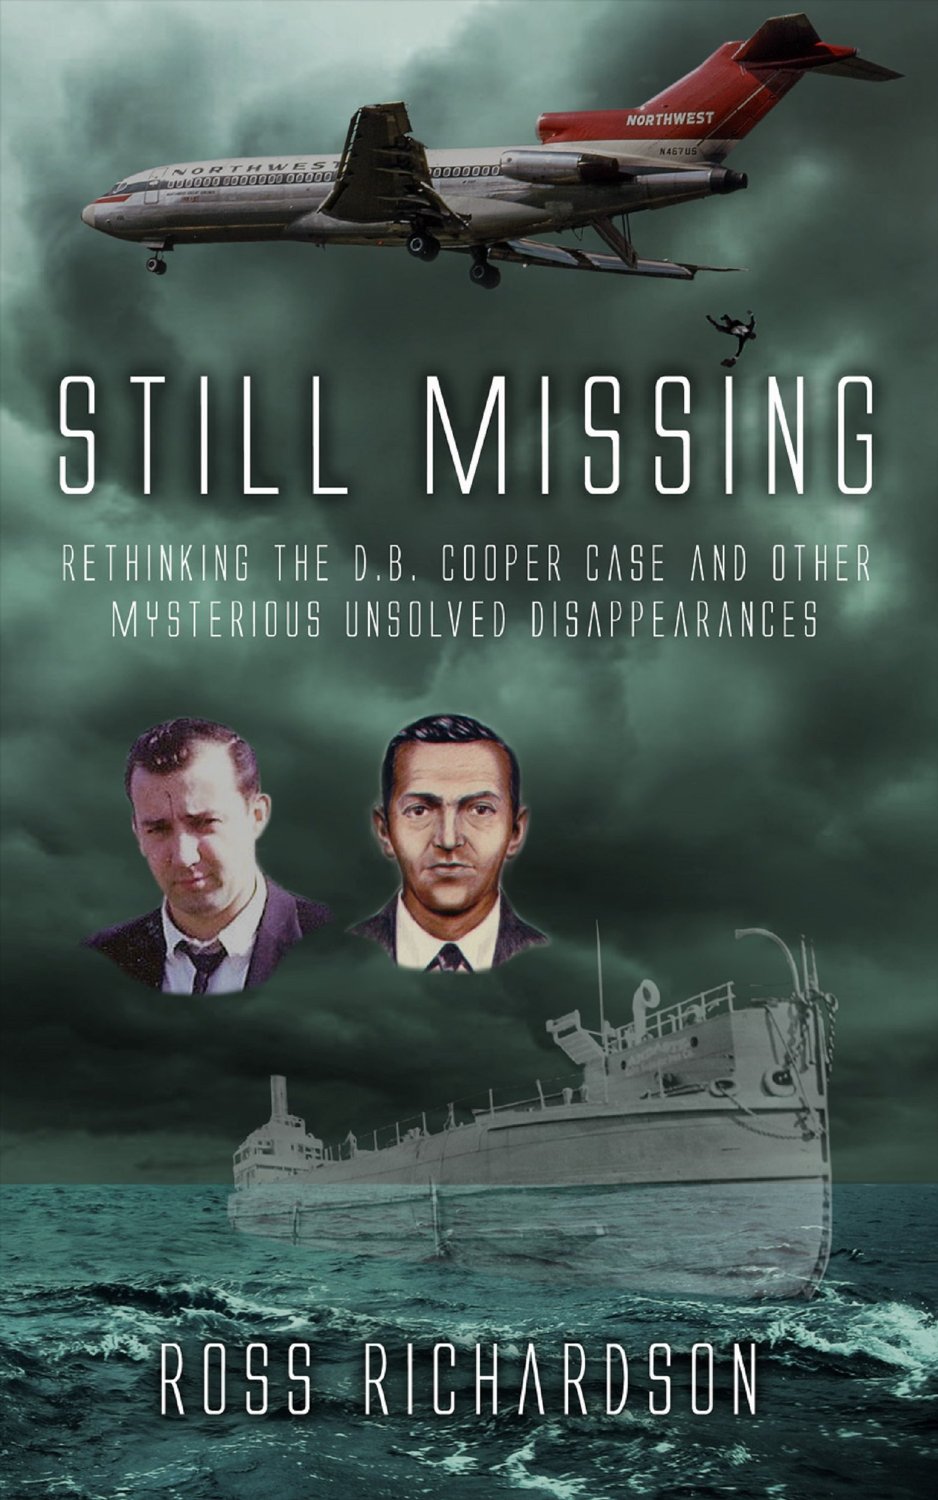 Still Missing: Rethinking The D.B. Cooper Case And Other Mysterious Unsolved Disappearances